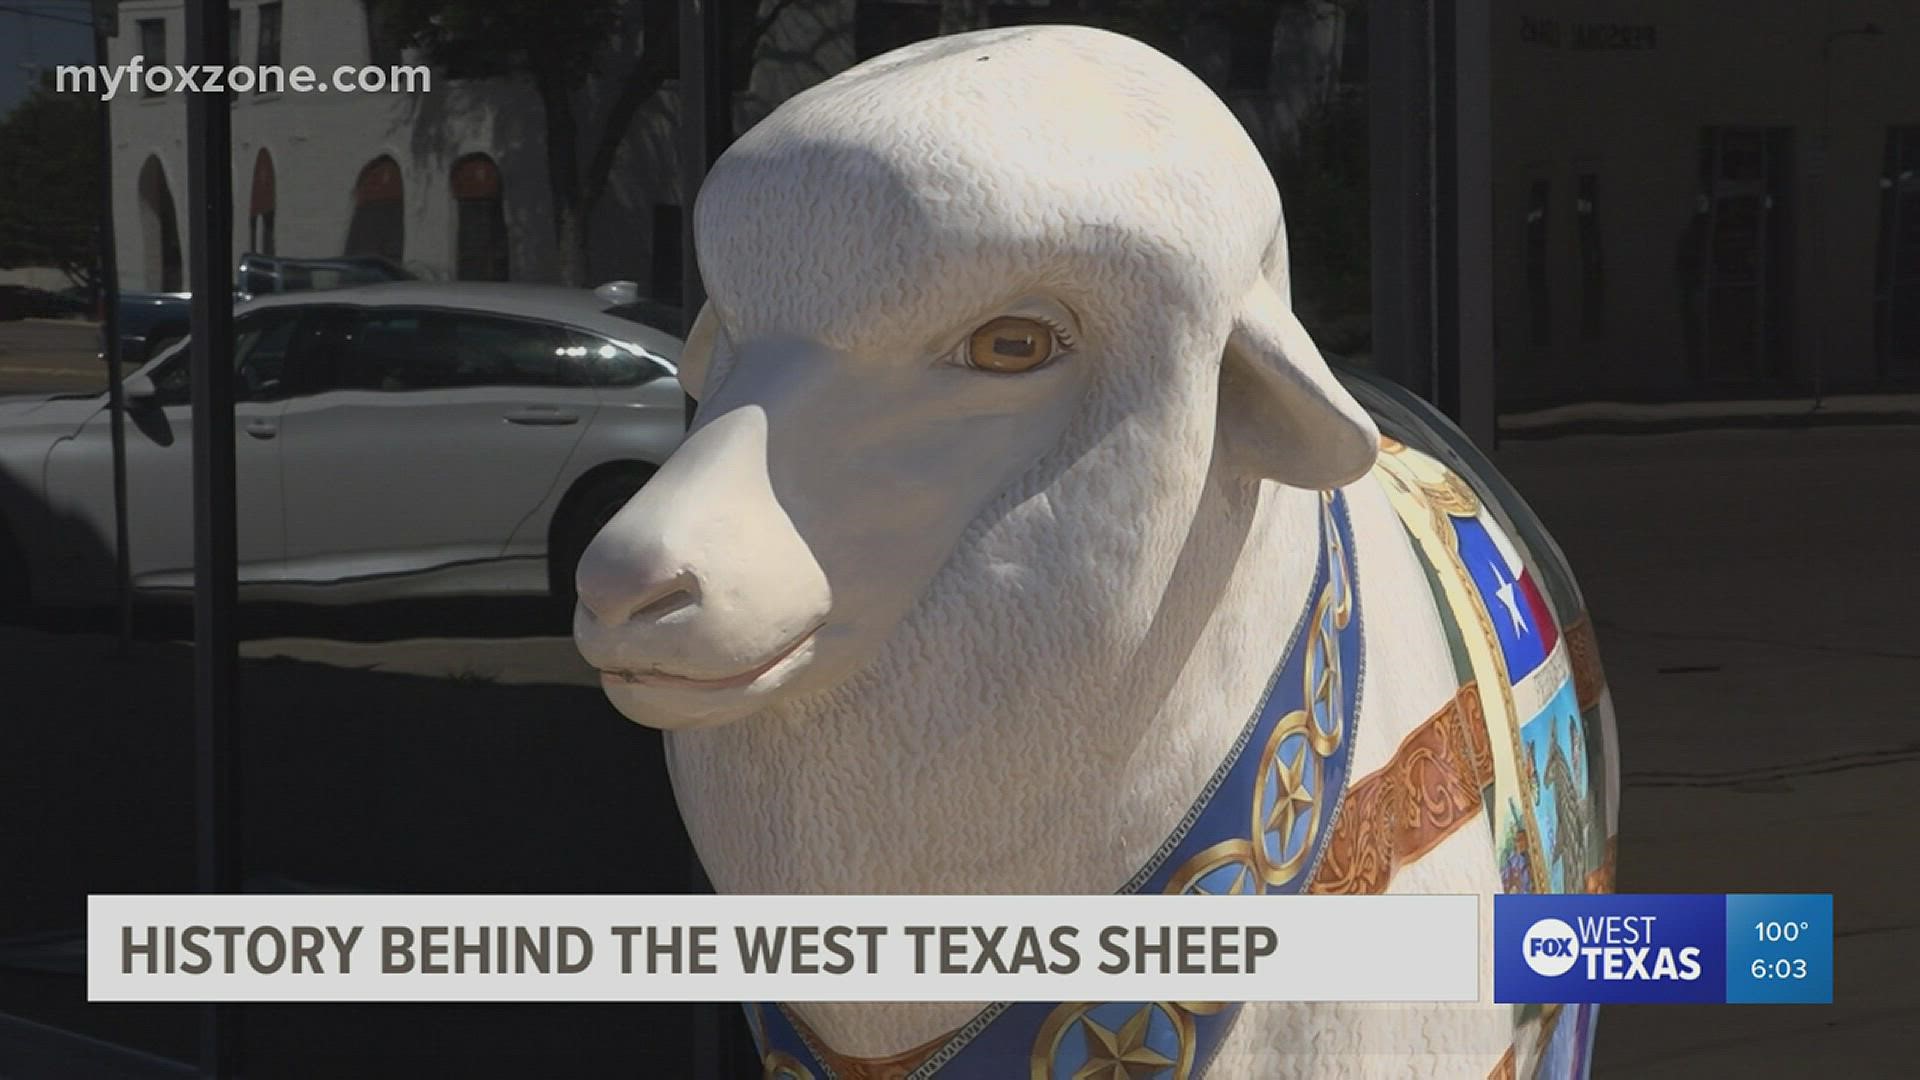 There are over 110 unique sheep spread across San Angelo and each one is painted by a local artist.